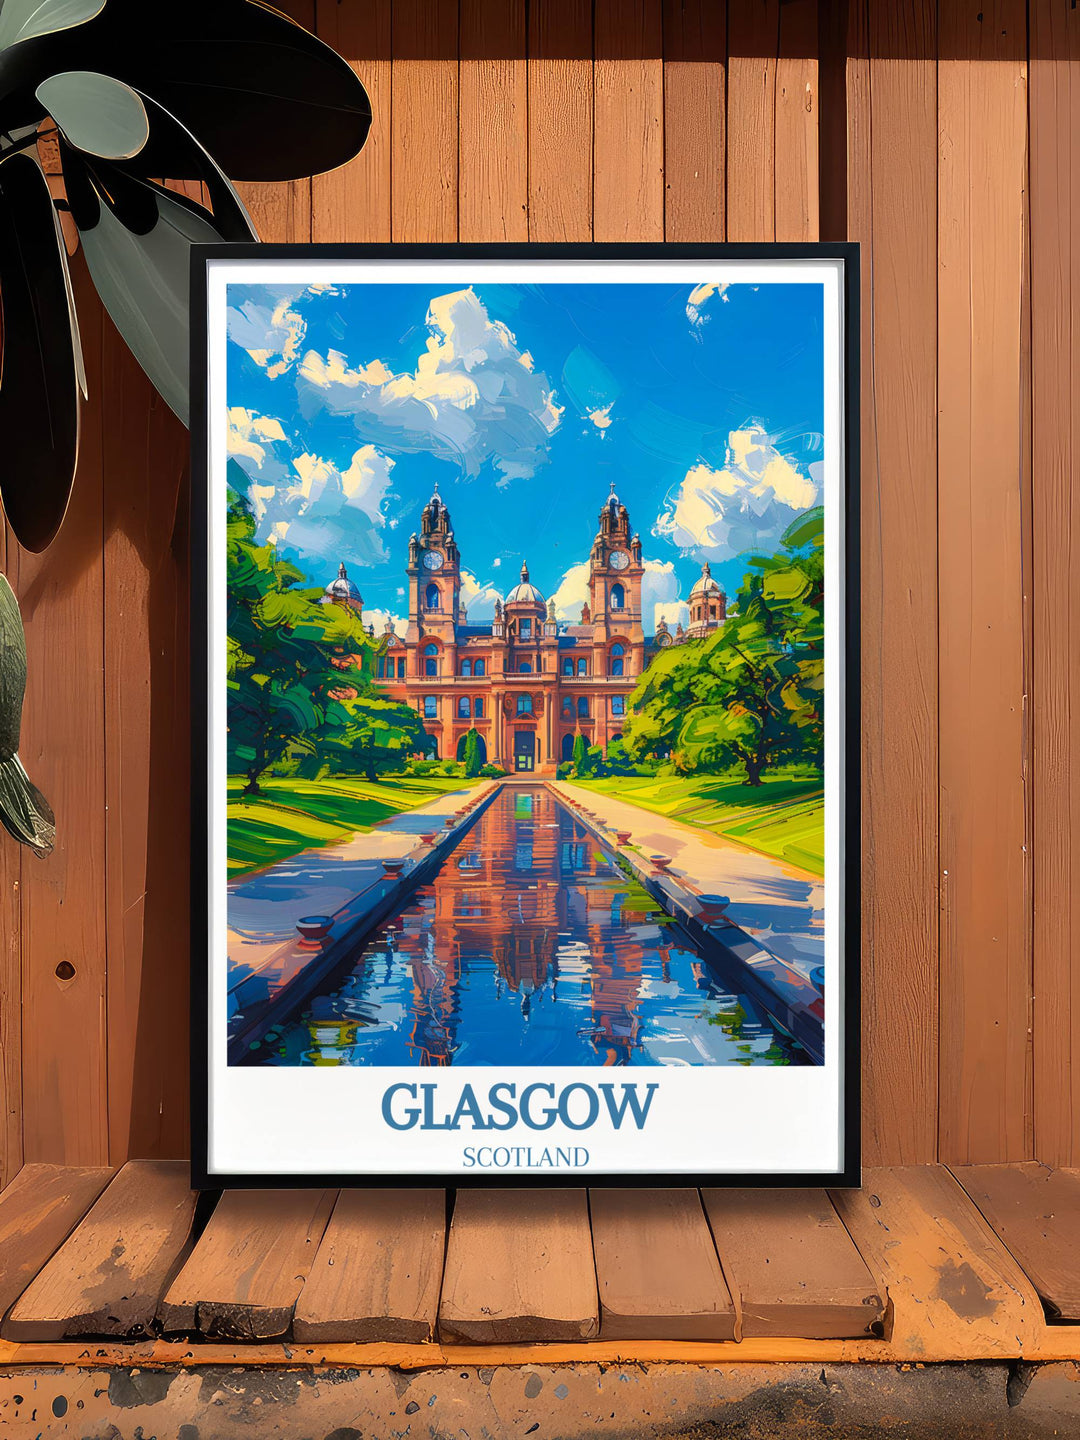 Our Scotland wall art, featuring picturesque Glasgow scenes, is a testament to the citys enchanting beauty, designed to captivate and inspire art lovers and travelers alike, providing a sophisticated addition to any collection of travel-inspired home decor.